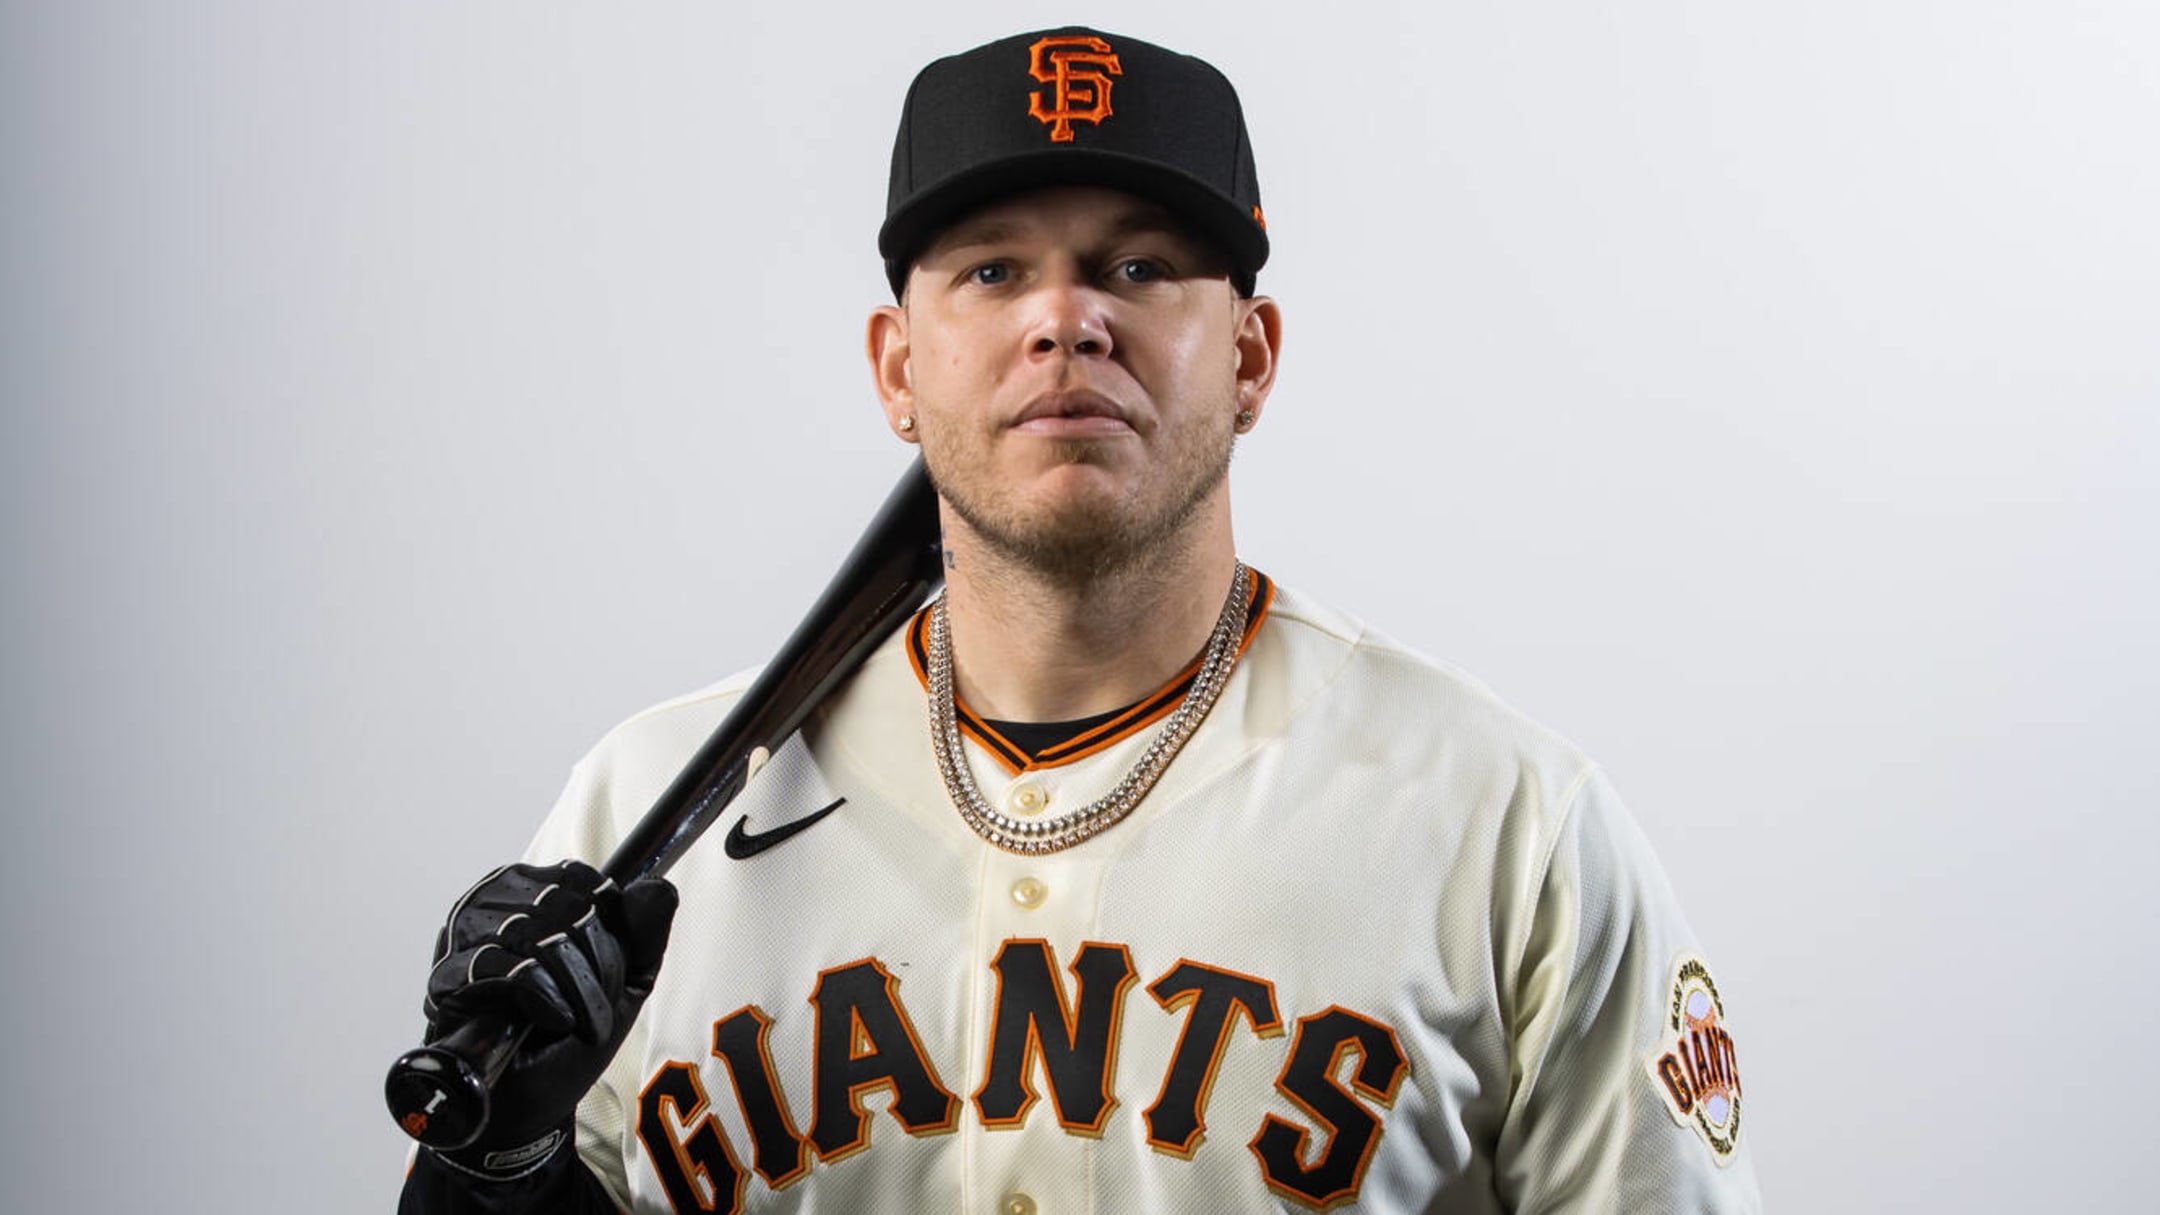 Two-time Gold Glove catcher to make Giants' Opening Day roster